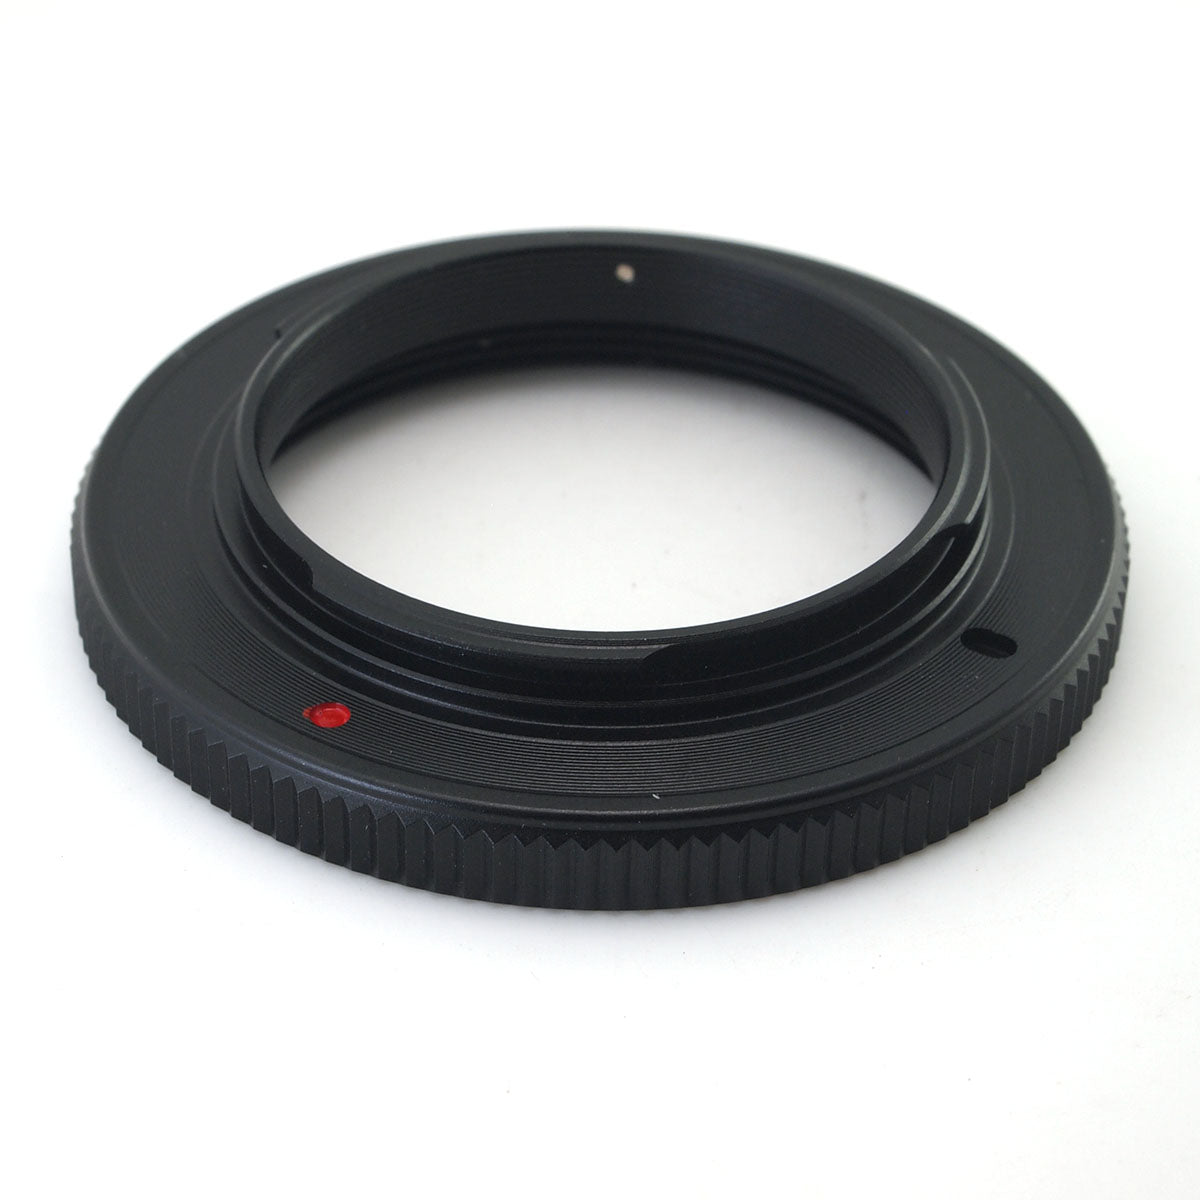 Super slim M42 screw mount lens to Olympus Panasonic Micro 4/3 mount adapter - for macro helicoid extension ring - OM-D E-M5 II OM-1 GH5